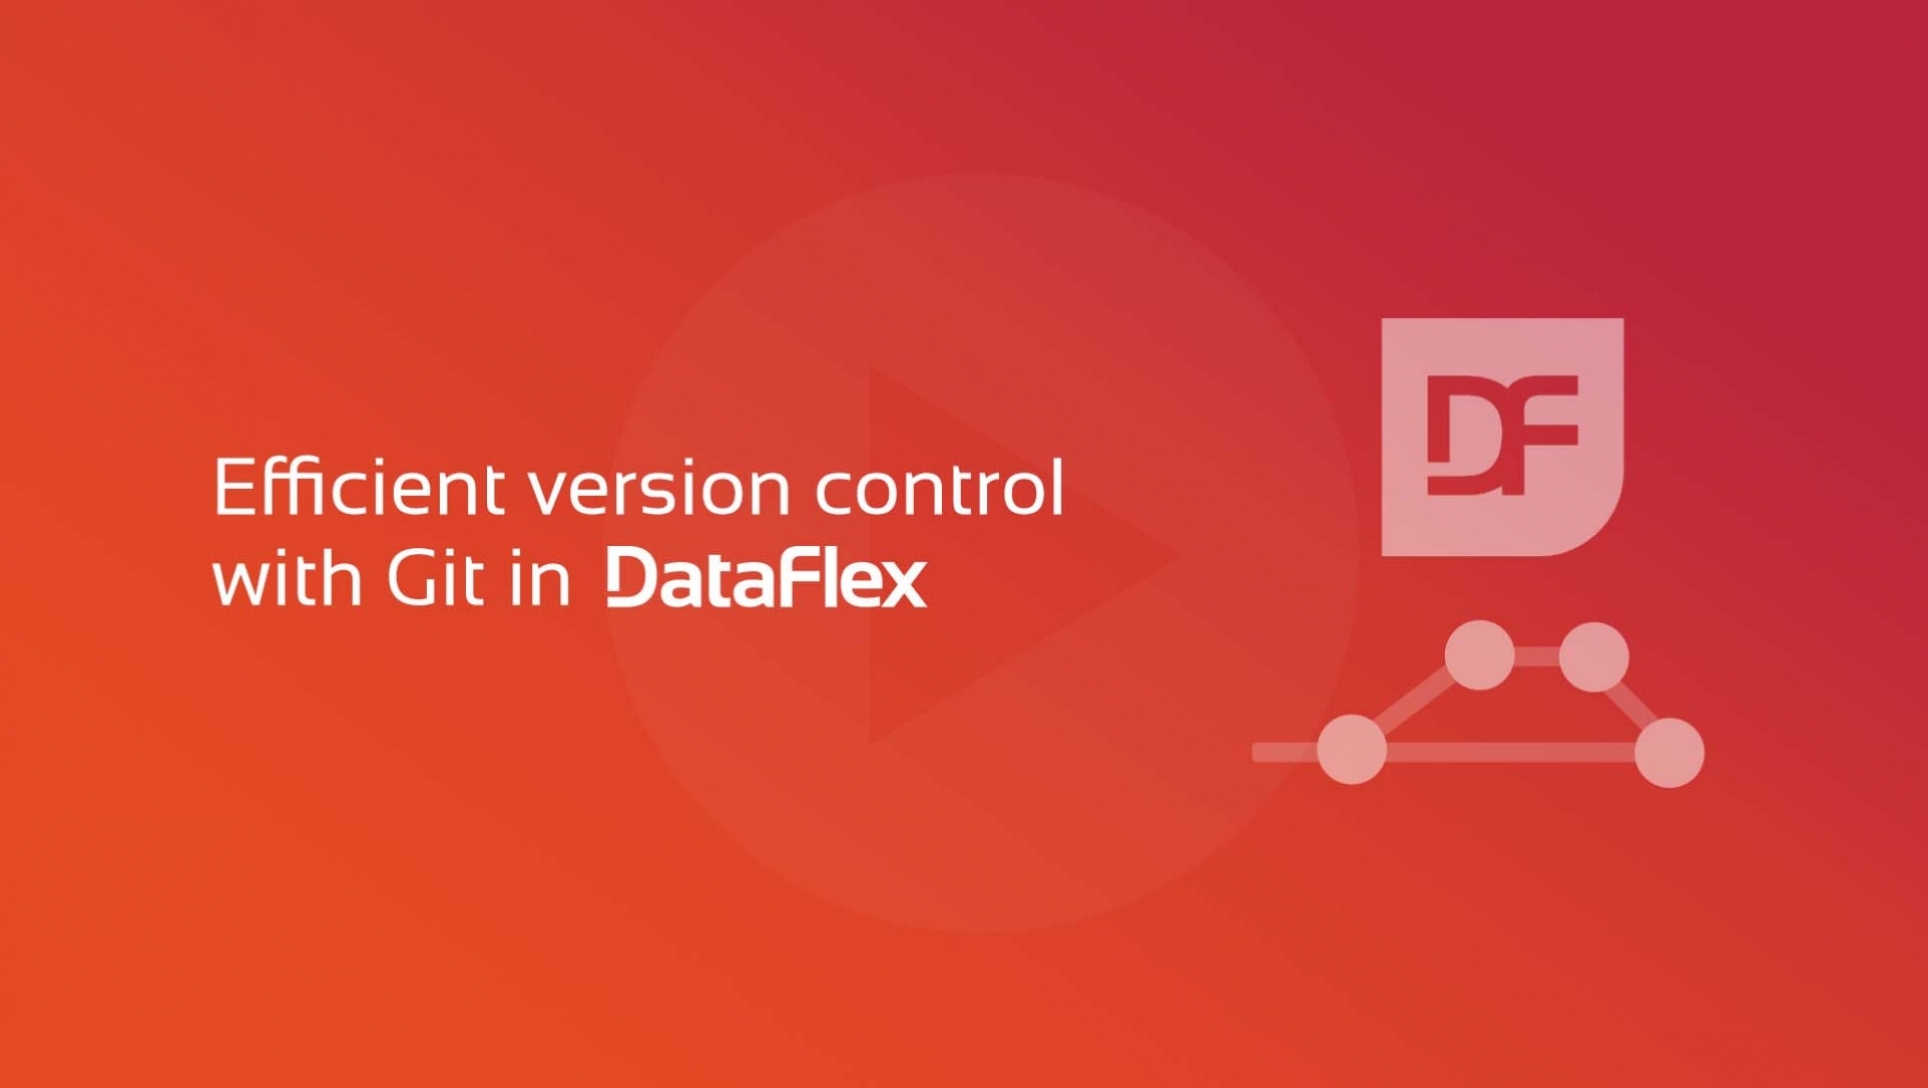 "Efficient version control with Git in DataFlex" video course